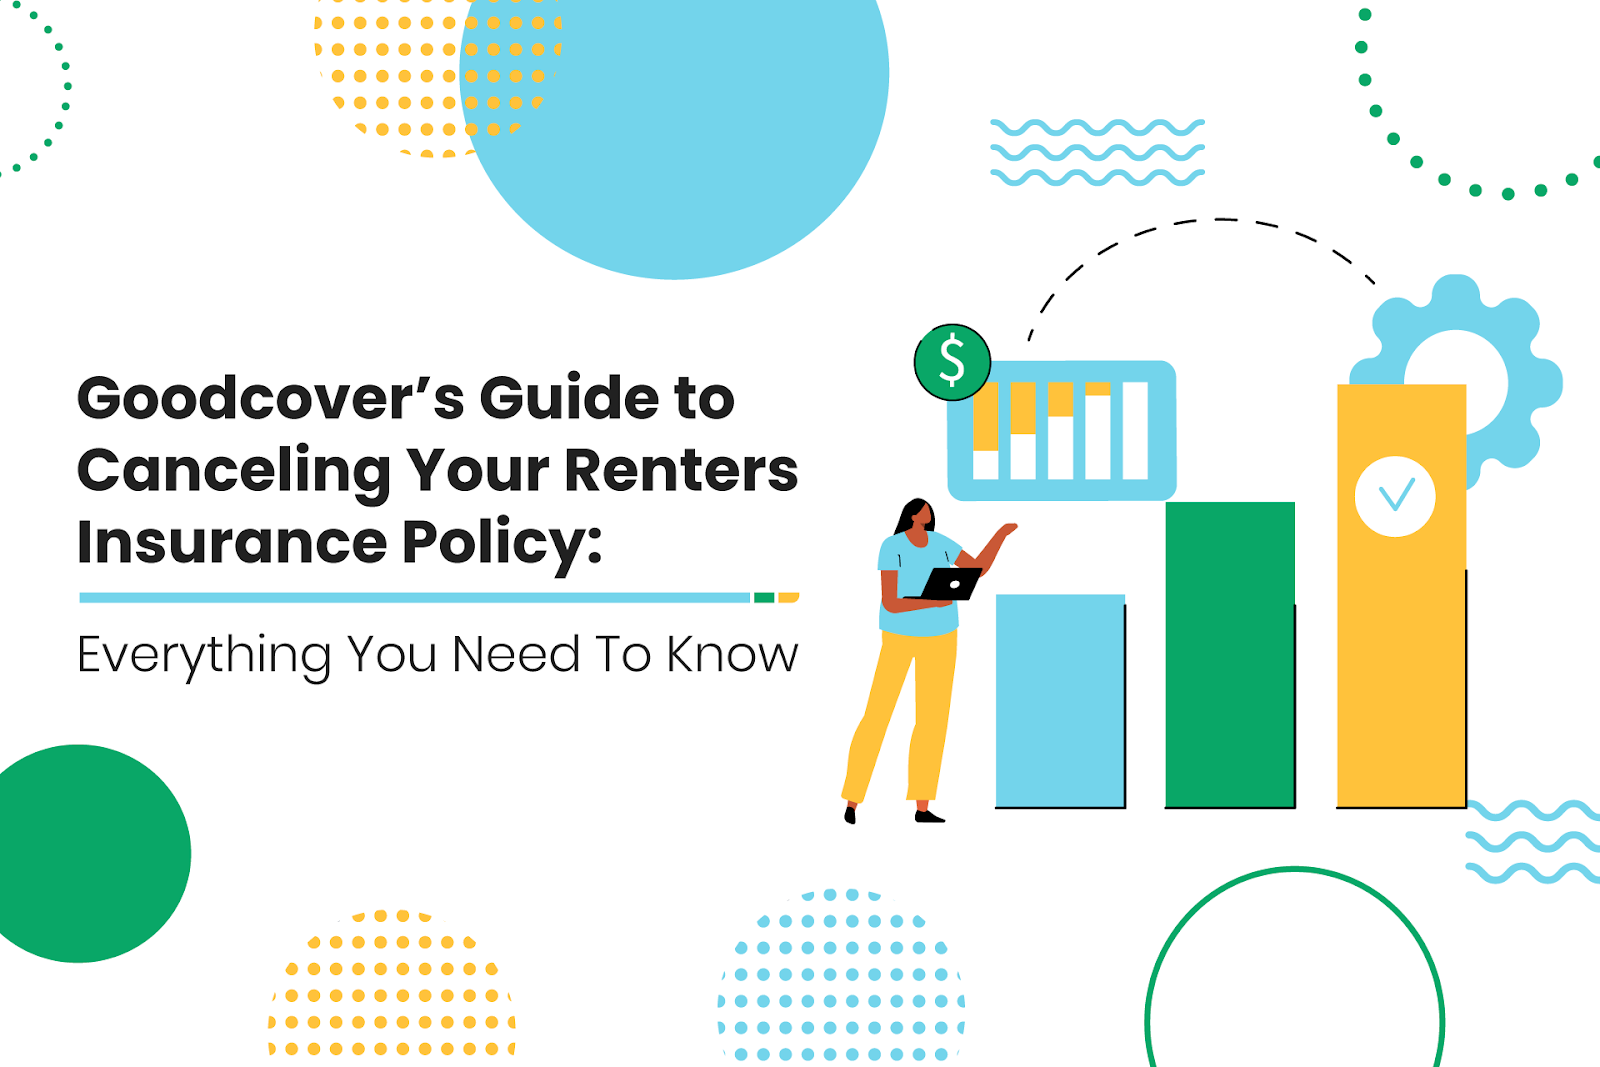 Goodcover’s Guide to Canceling Your Renters Insurance Policy: Everything You Need To Know